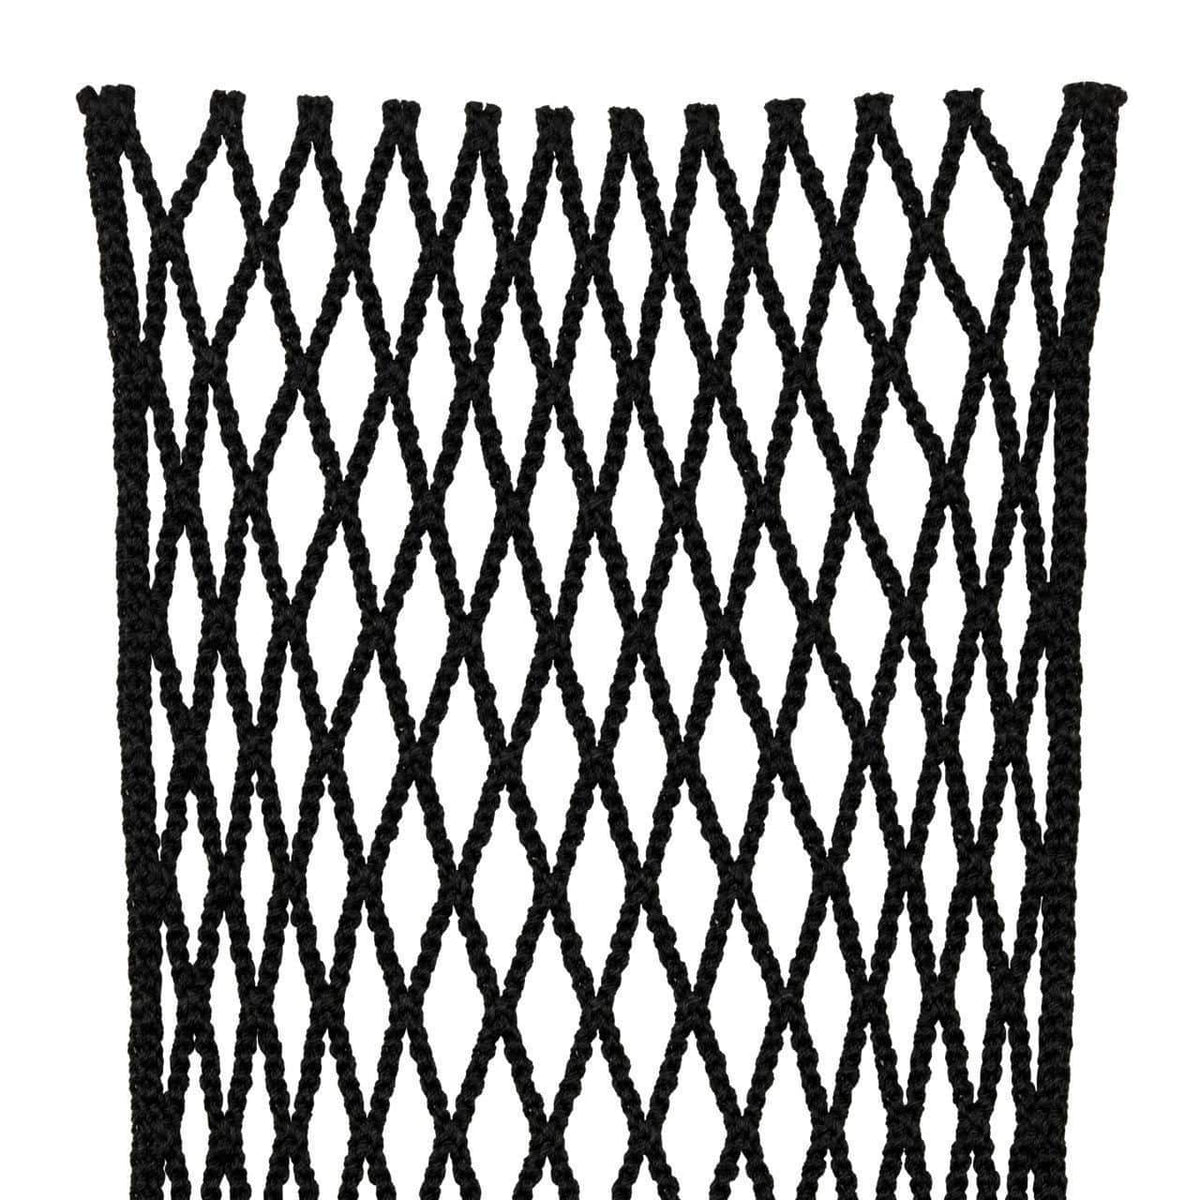 StringKing Stringing Supplies Black / 12D / Semi-Hard StringKing Grizzly 2x Goalie Lacrosse Mesh from Lacrosse Fanatic